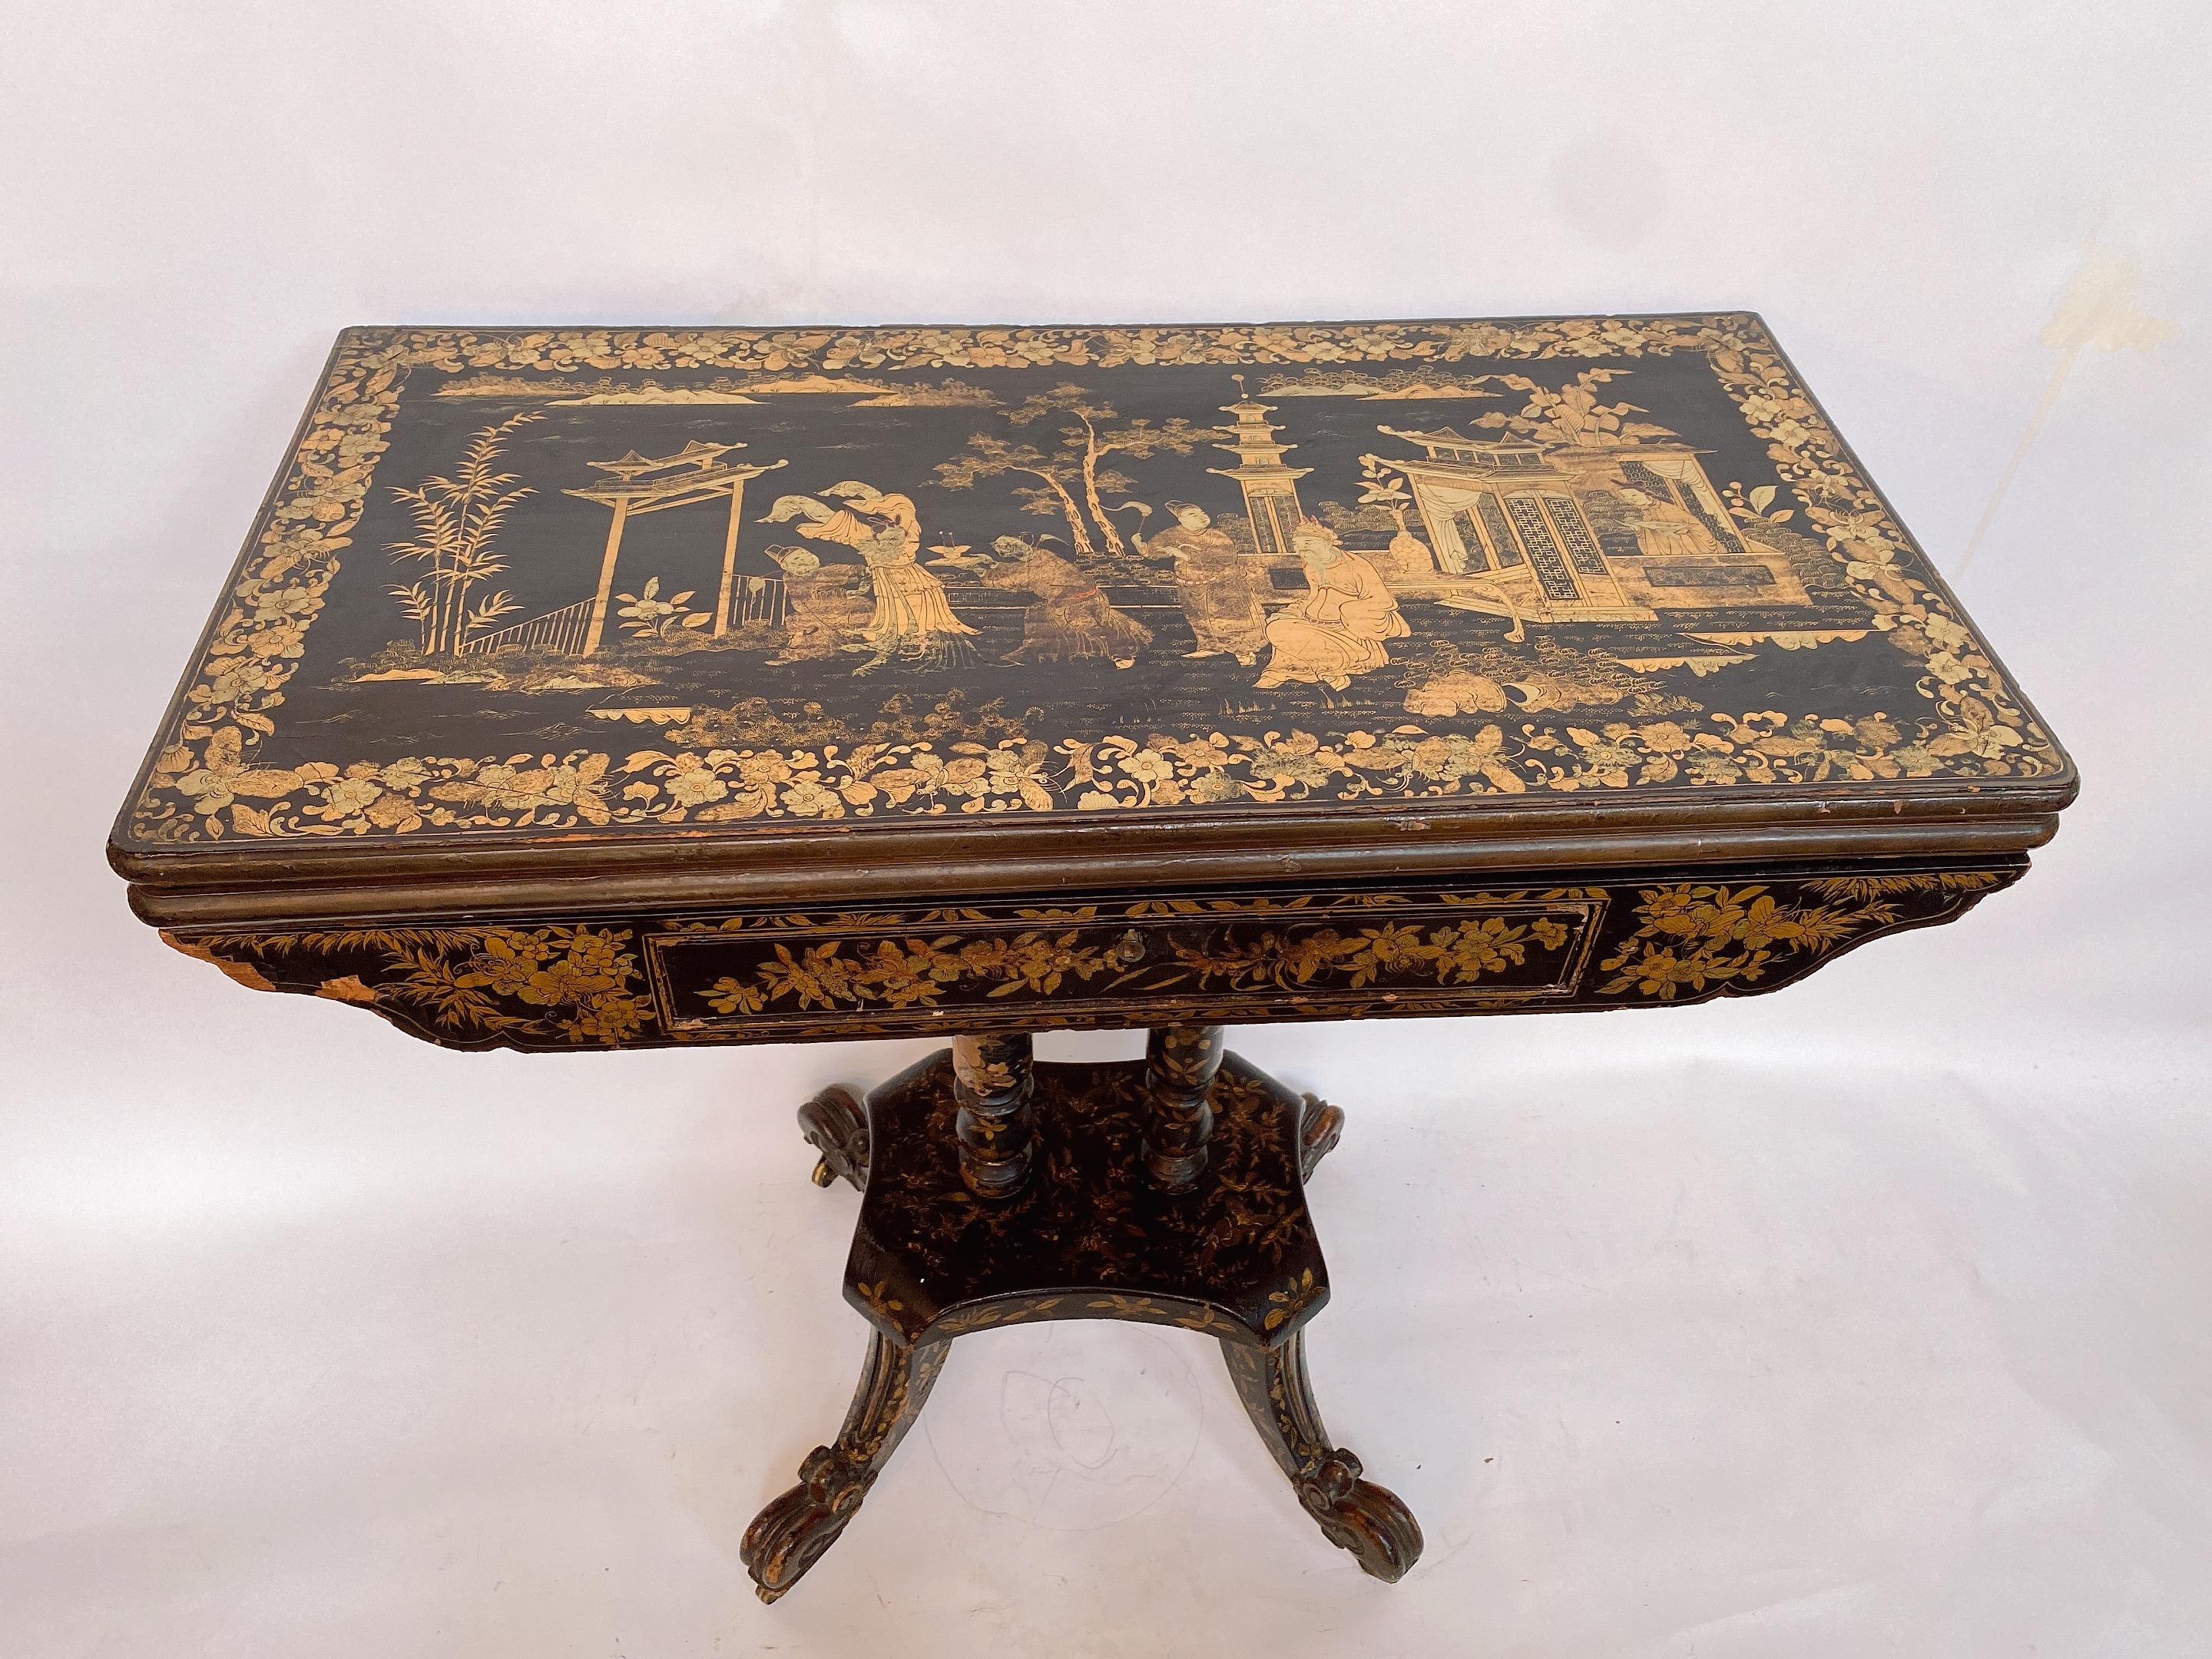 the 19th century of the Qing Dynasty in China, this gilt black lacquered chinoiseries France gaming table, it is decorated with the designs hand paint and gilt on black lacquer. see pictures for more.